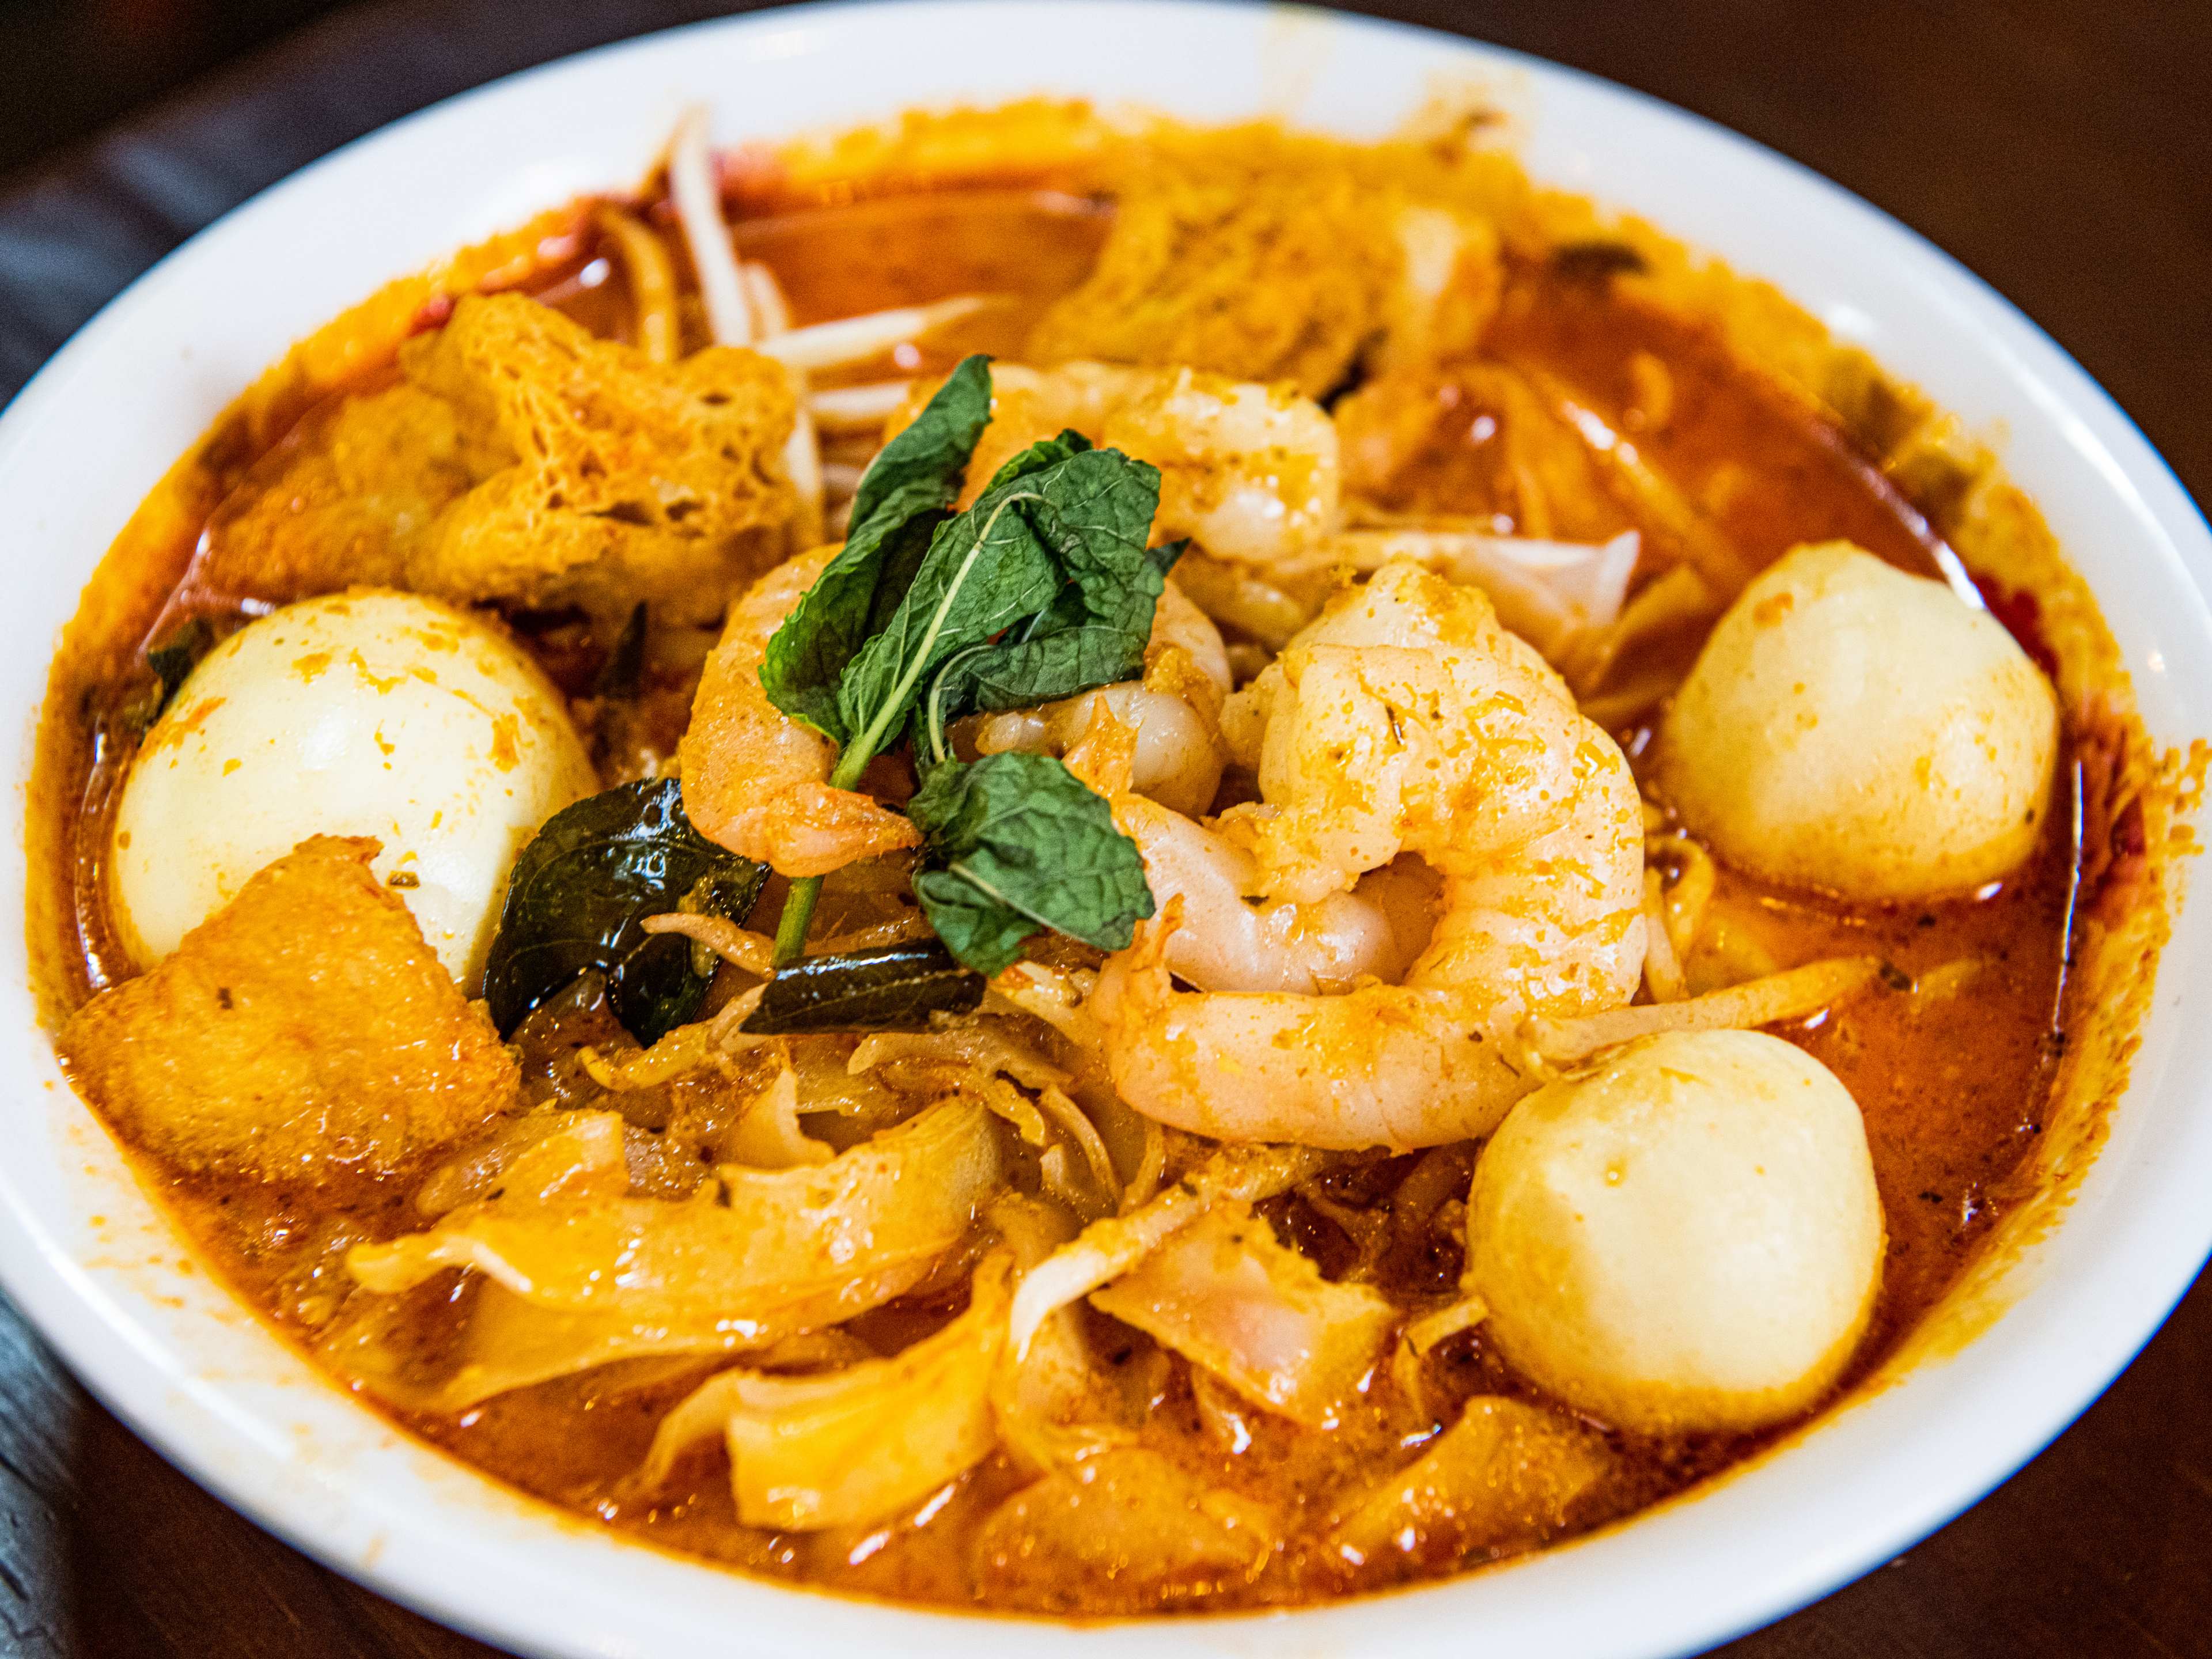 The curry laksa from Hawker's Kitchen.